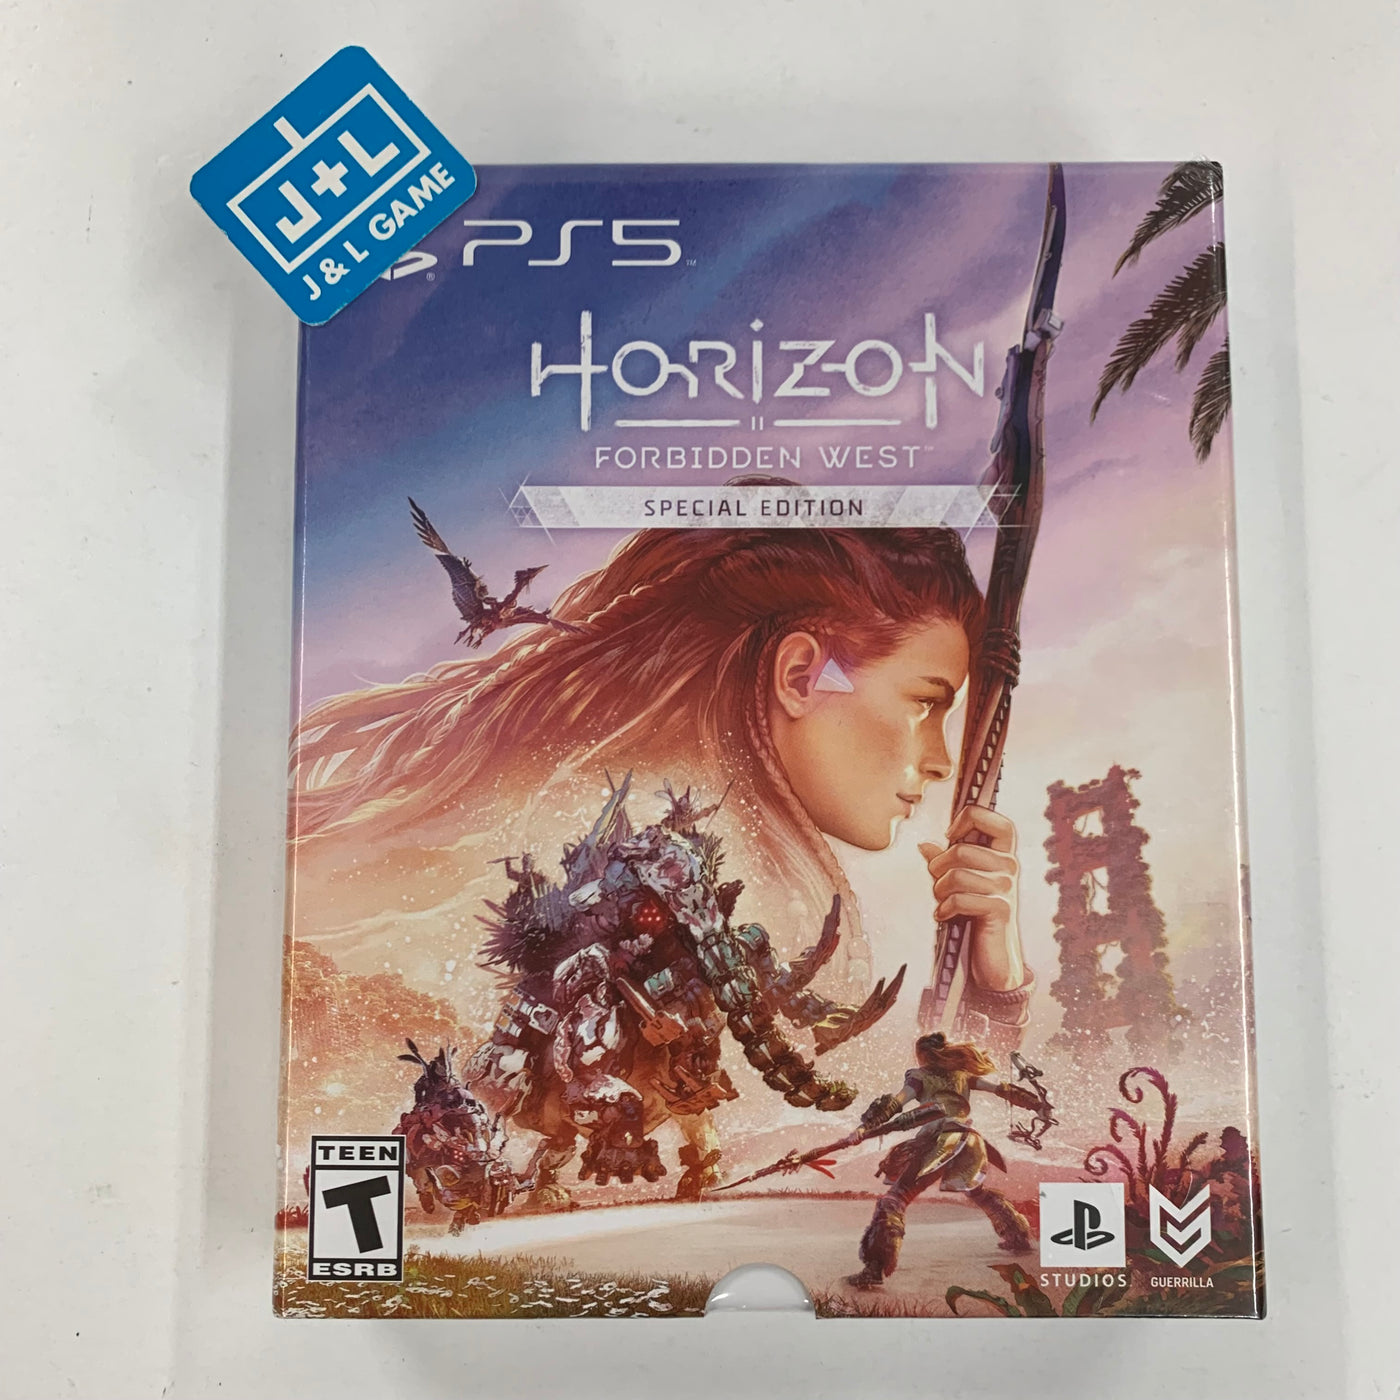 Game | Edition PlayStation West J&L Horizon Special (PS5) - 5 Forbidden